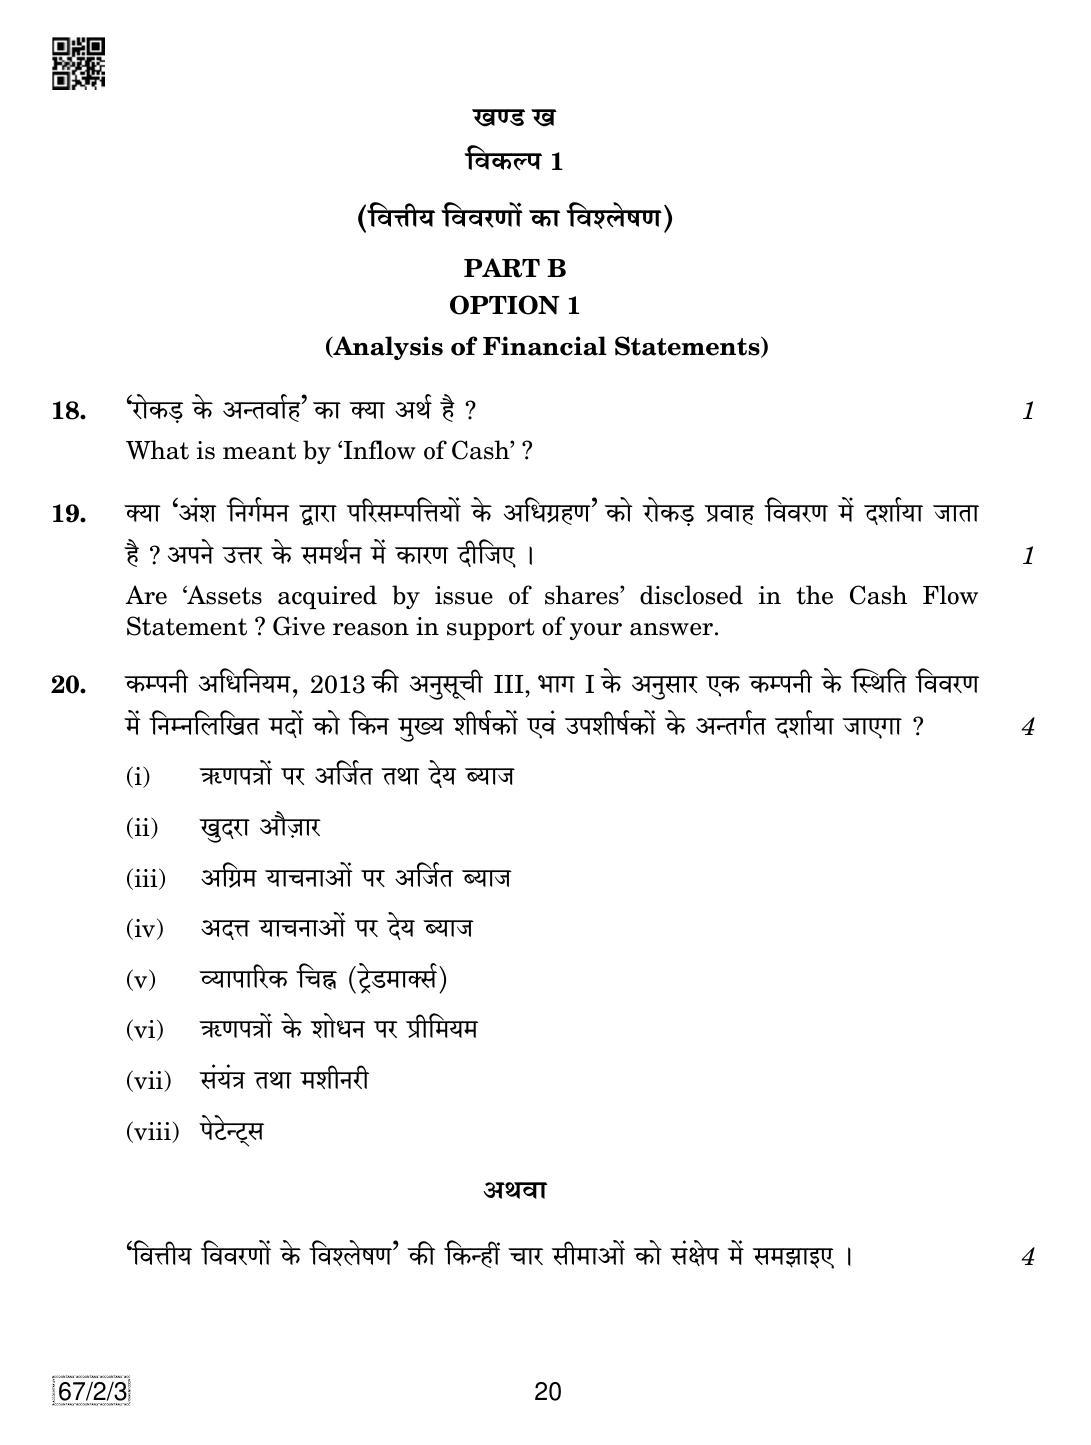 CBSE Class 12 67-2-3 Accountancy 2019 Question Paper - Page 20